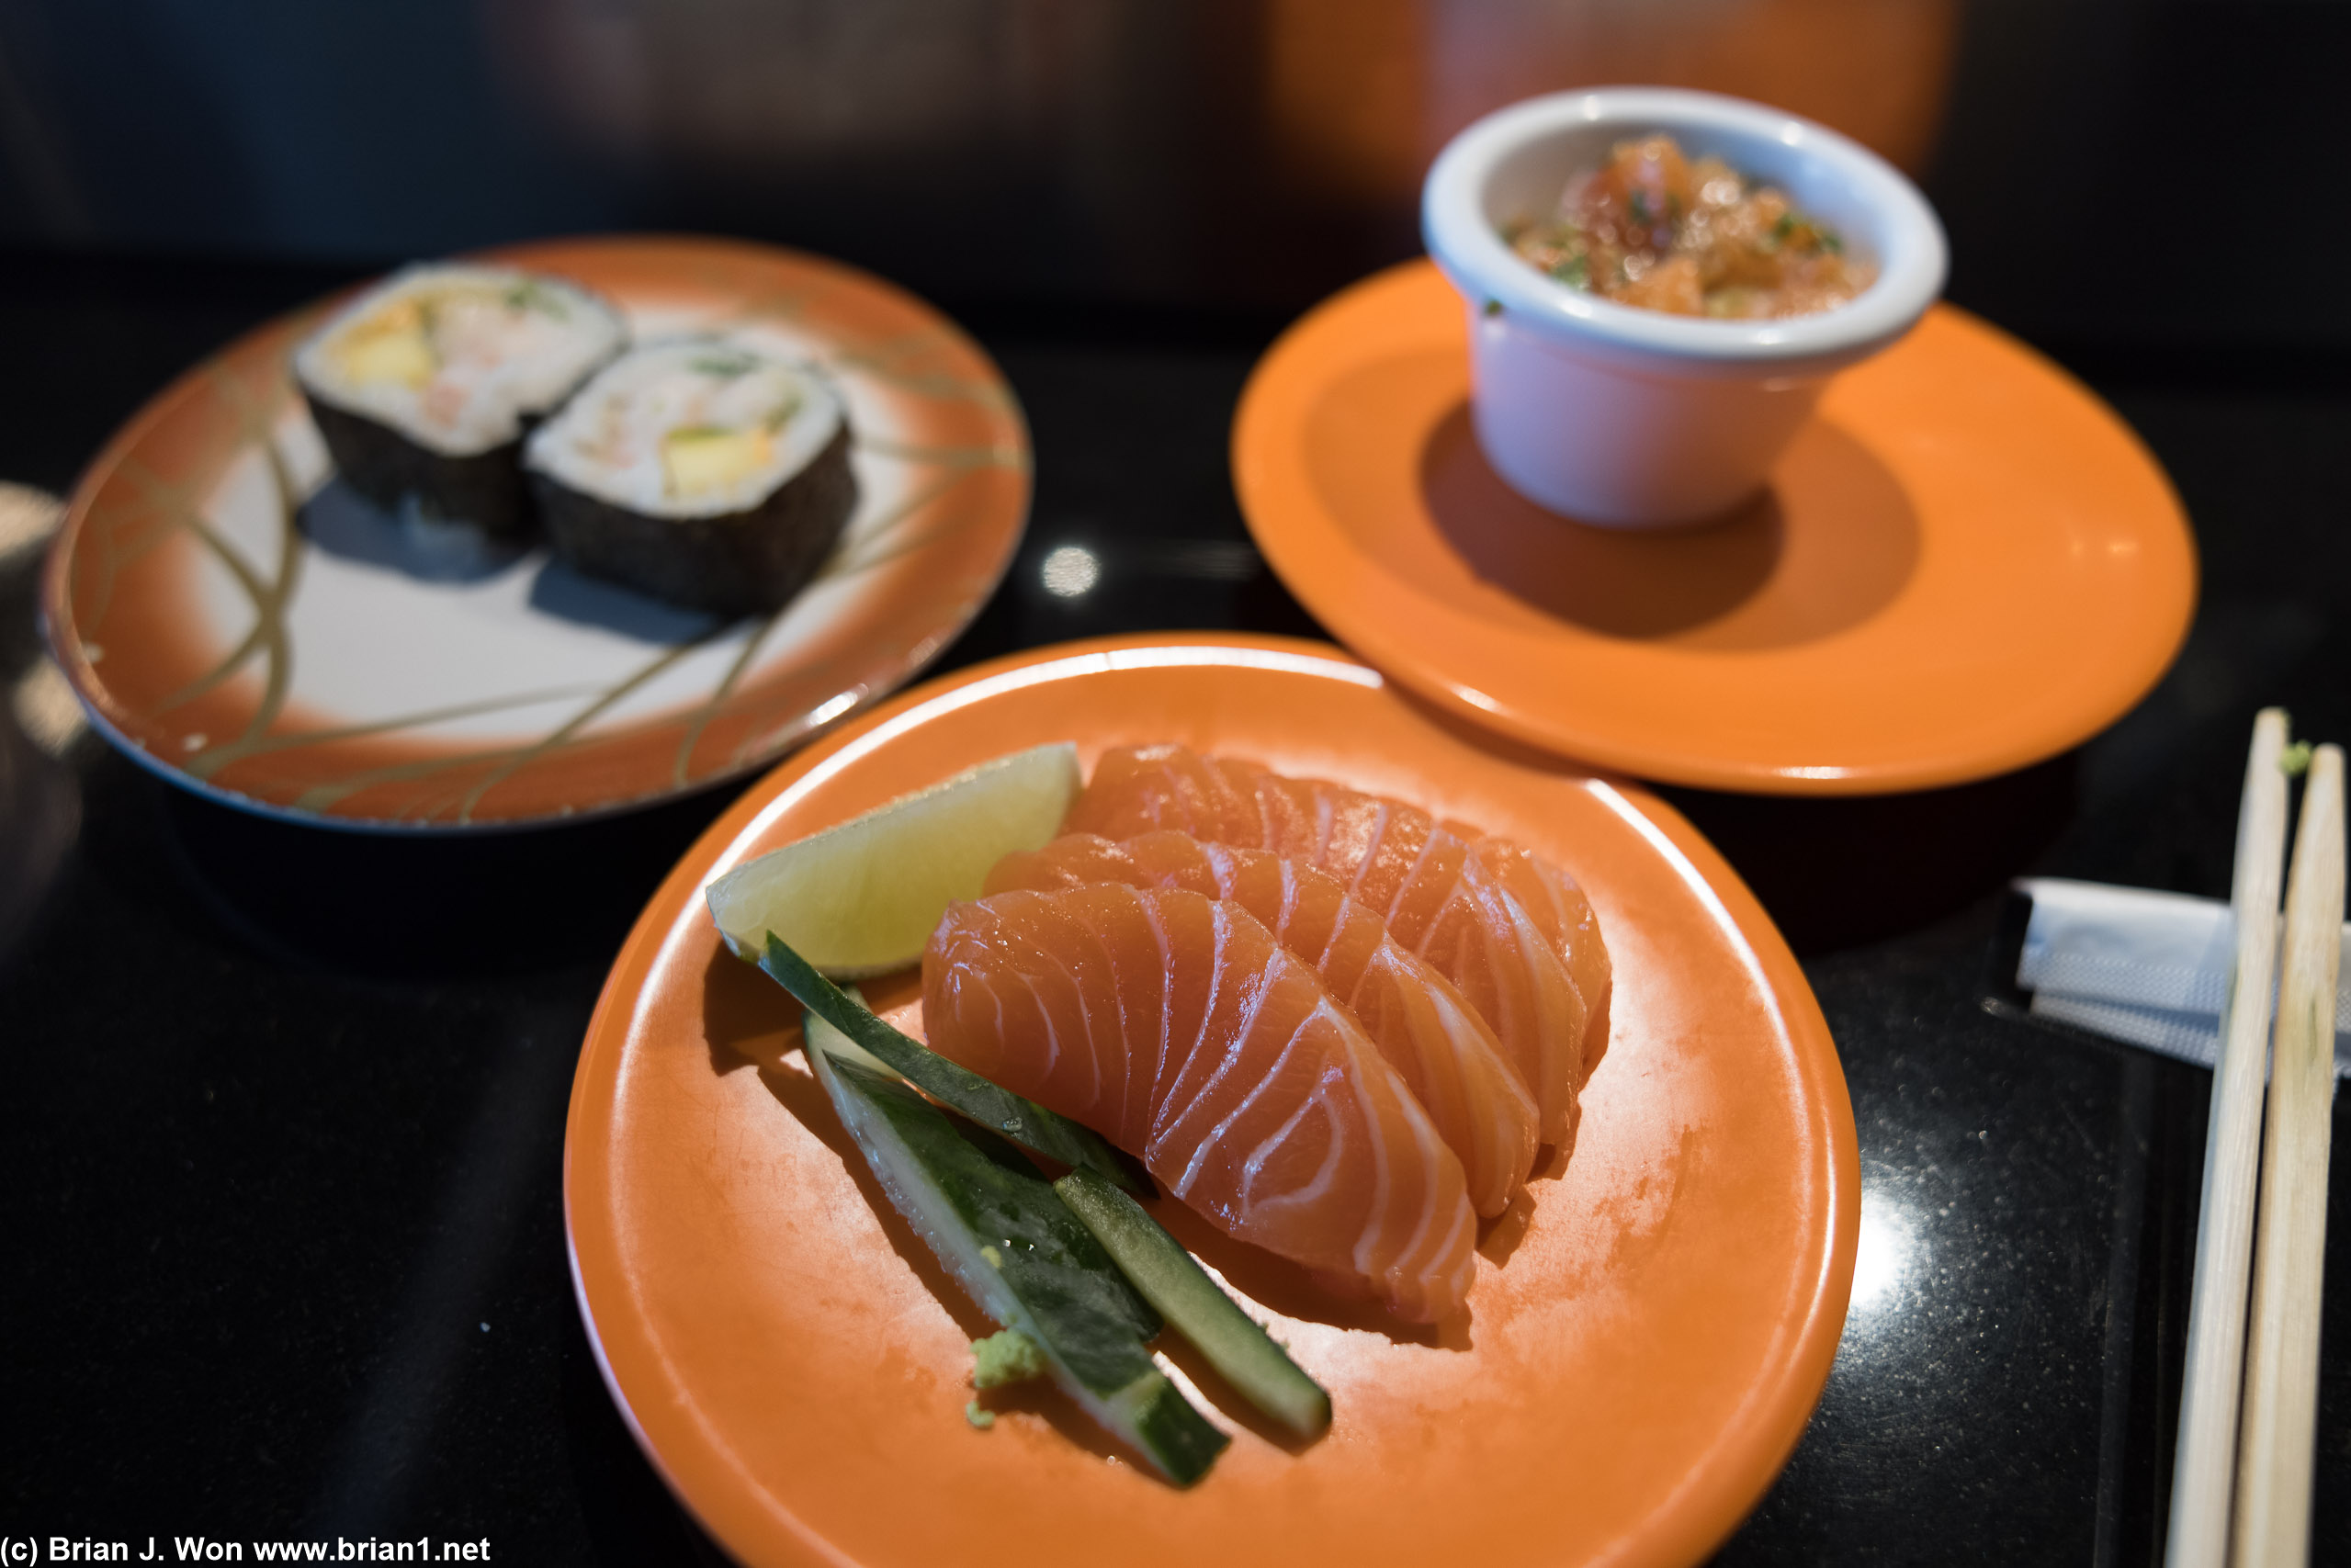 Salmon sashimi was pretty good, the rest was okay at best, kinda gross at worst.